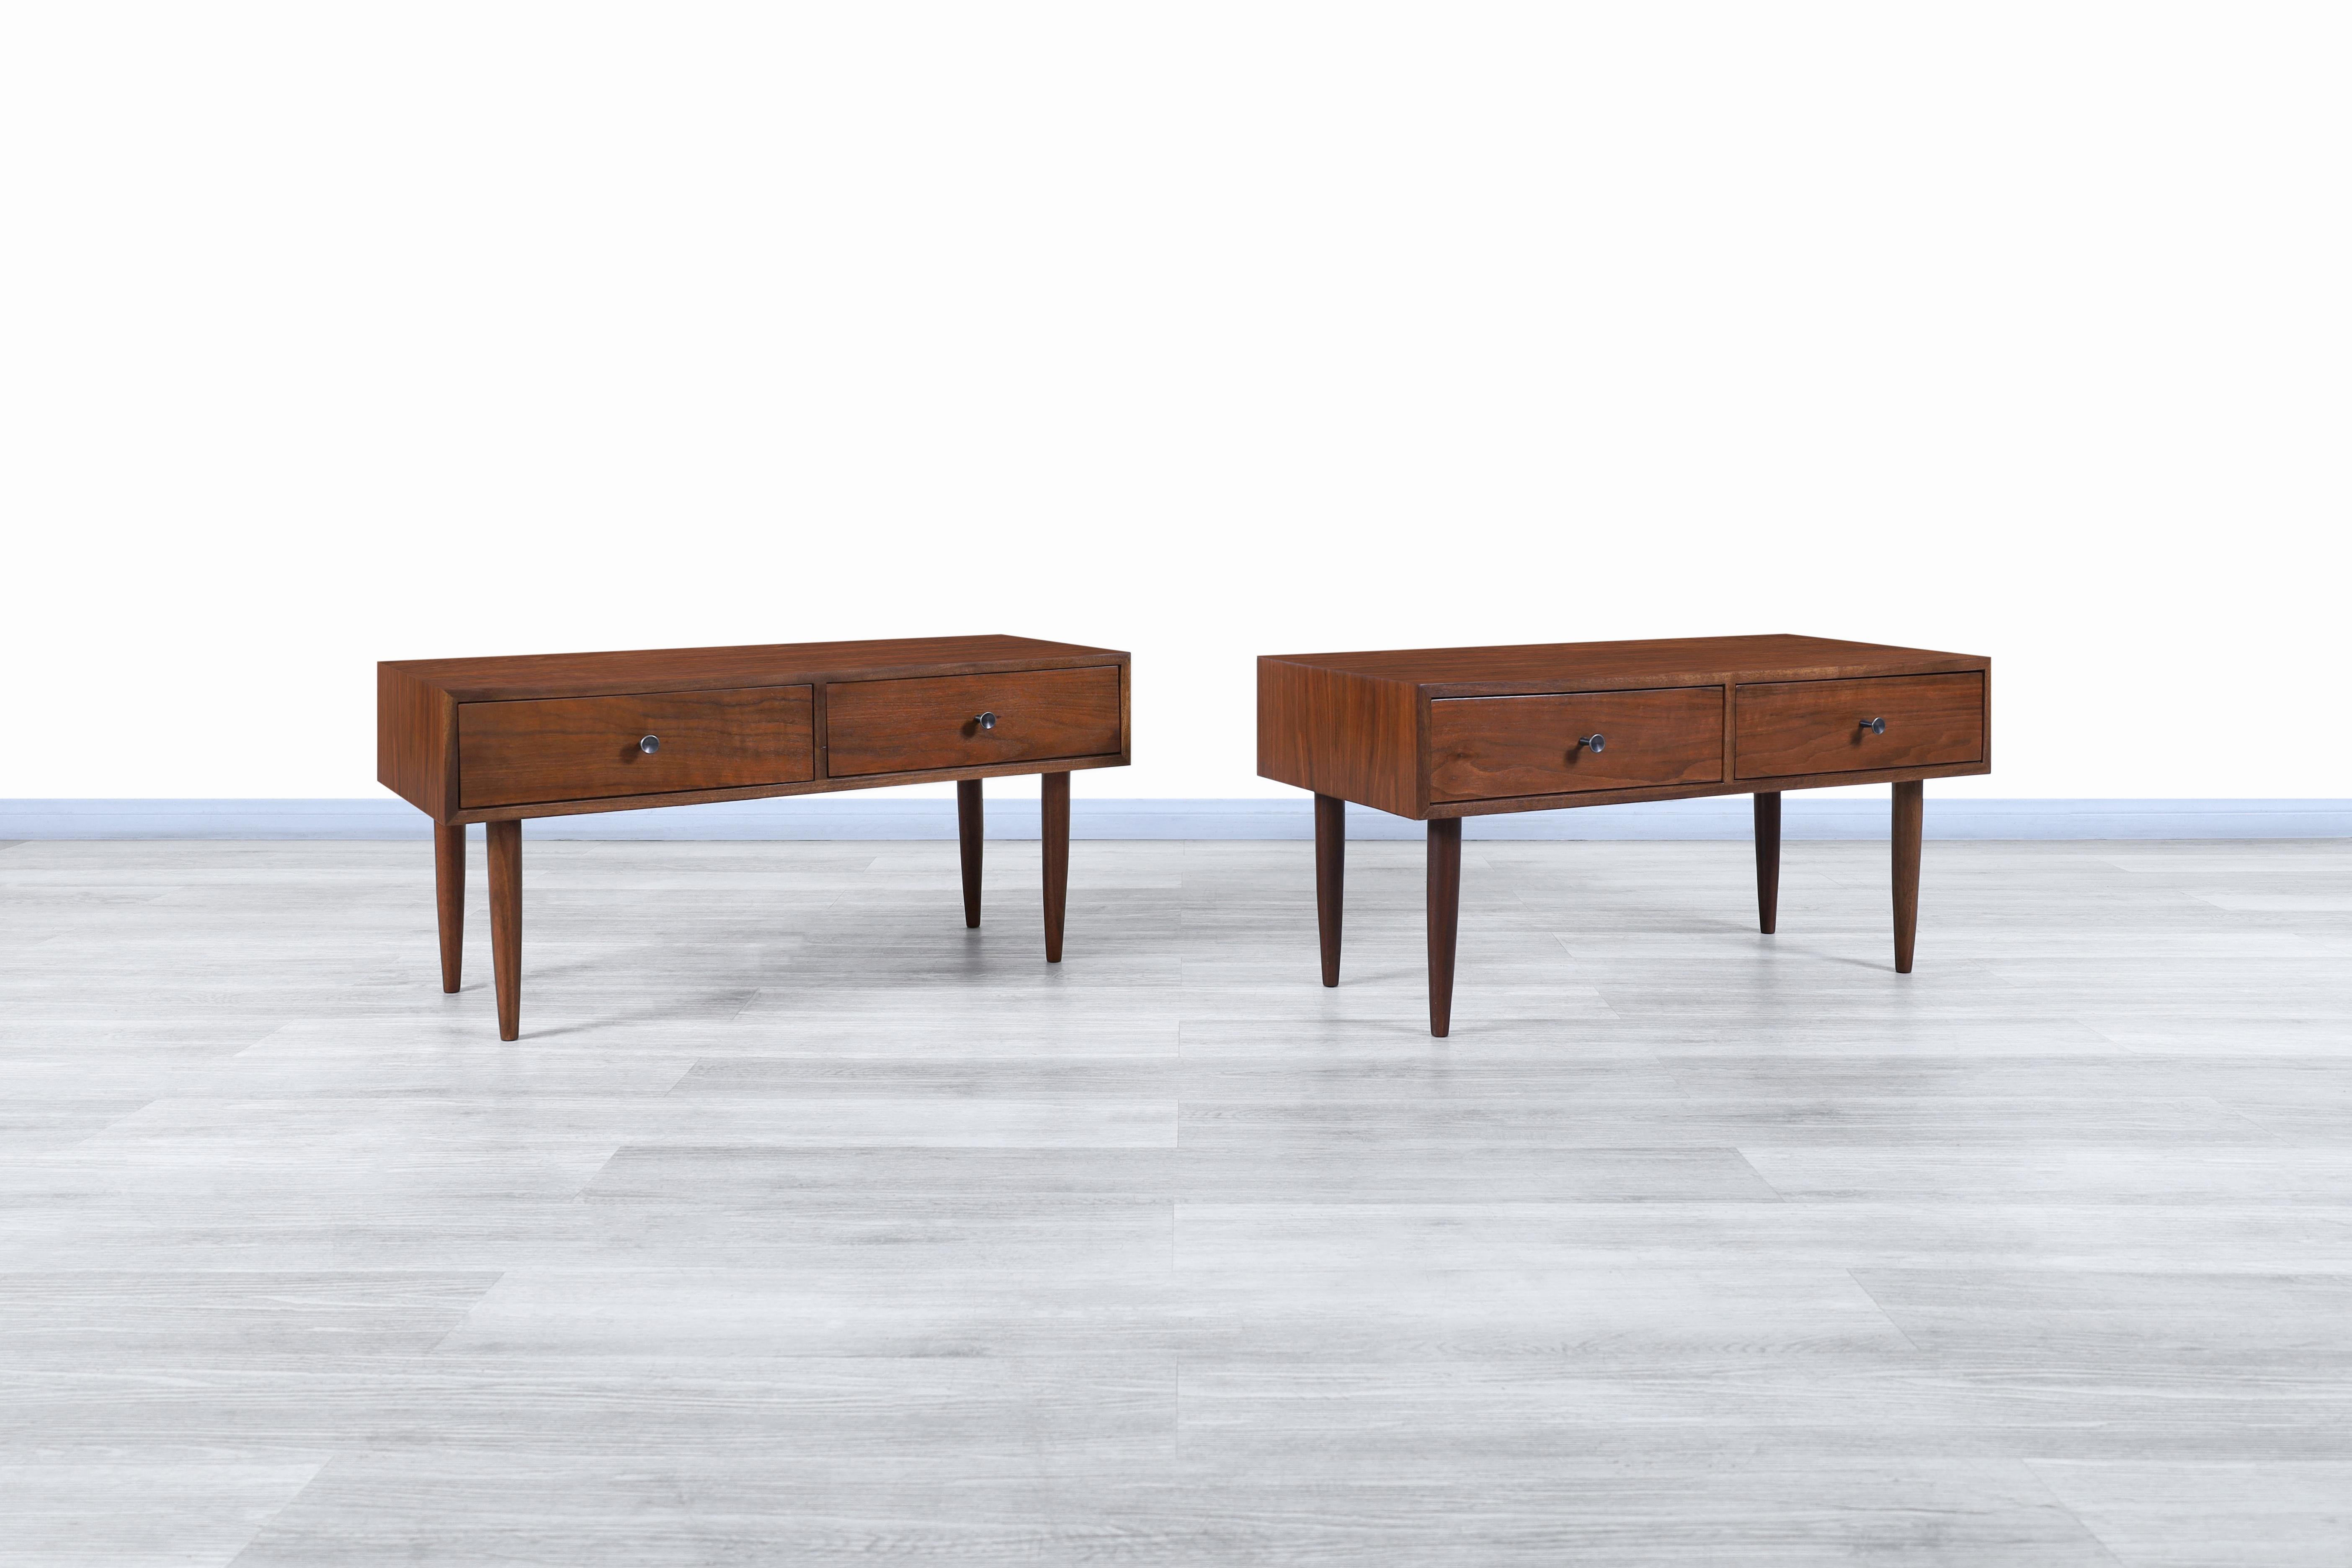 Amazing vintage walnut nightstands/end tables by Milo Baughman for Glenn of California in the United States, circa 1960s. These nightstands have a minimalist but highly functional design and have been made from walnut wood. Each nightstand features